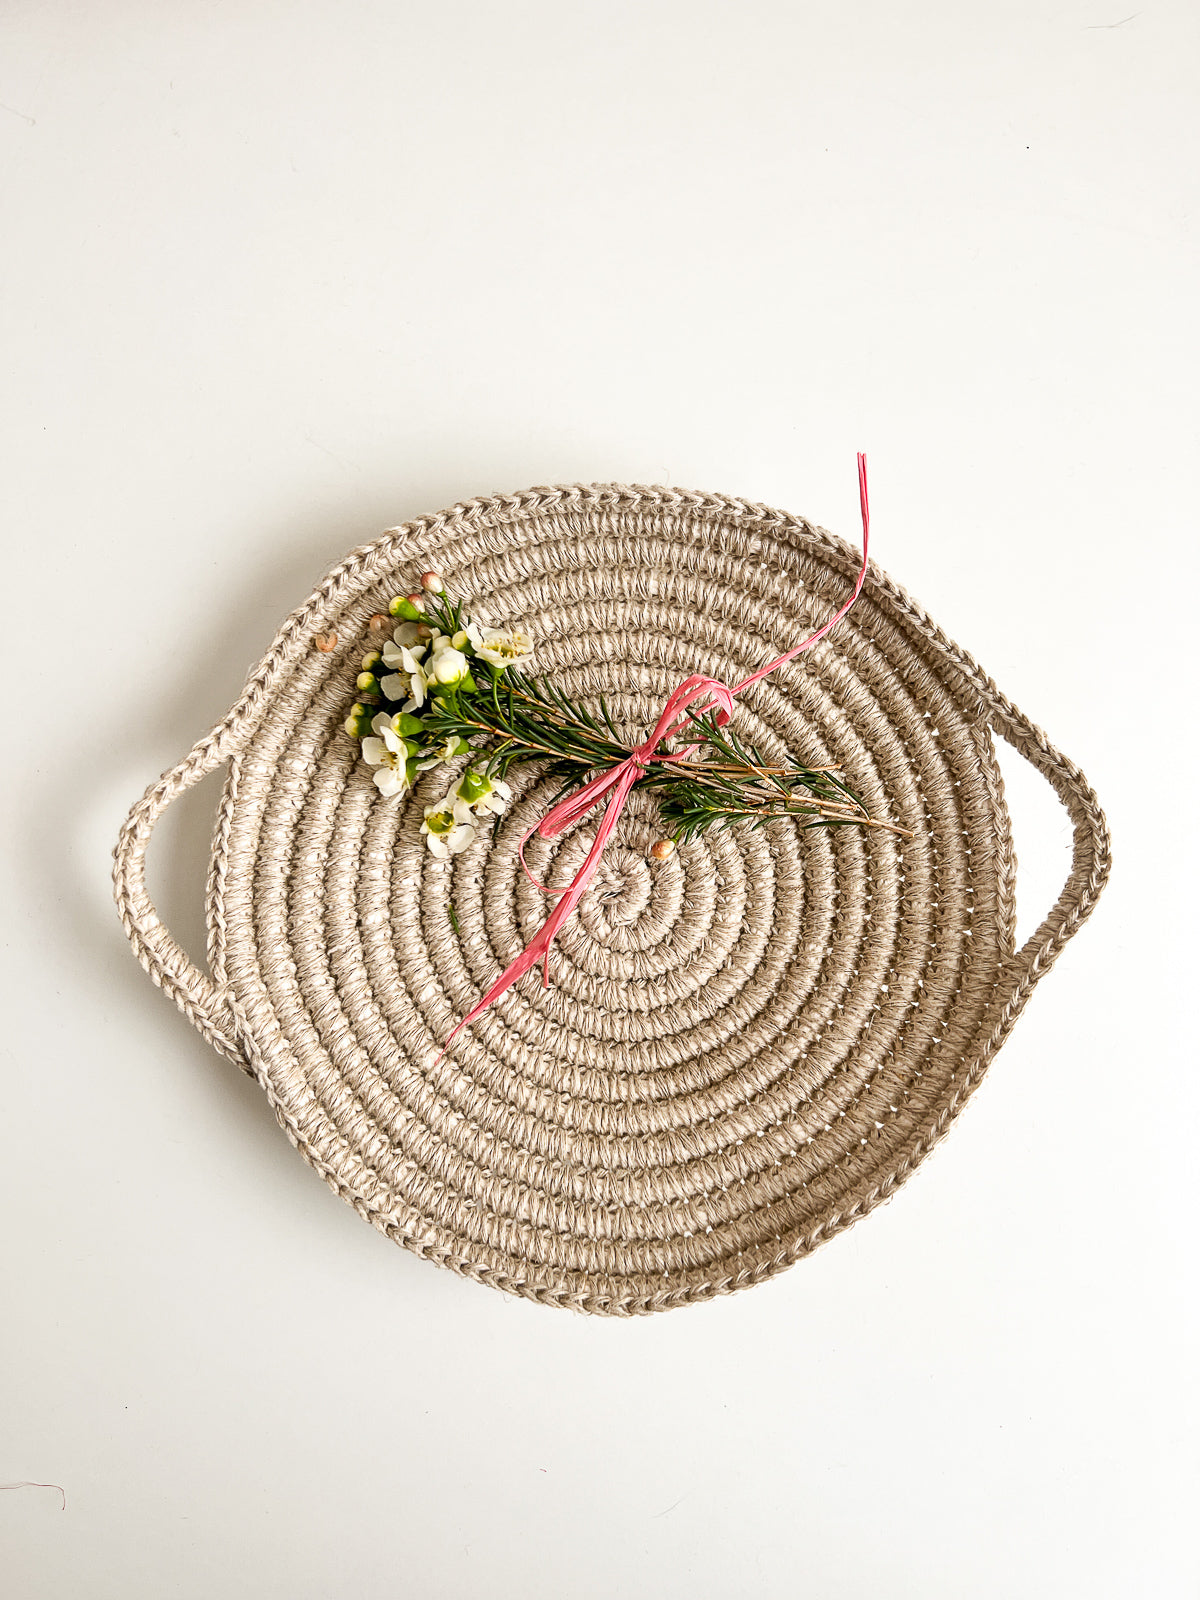 Crochet a Beginner-Friendly Coiled Basket with this Kit